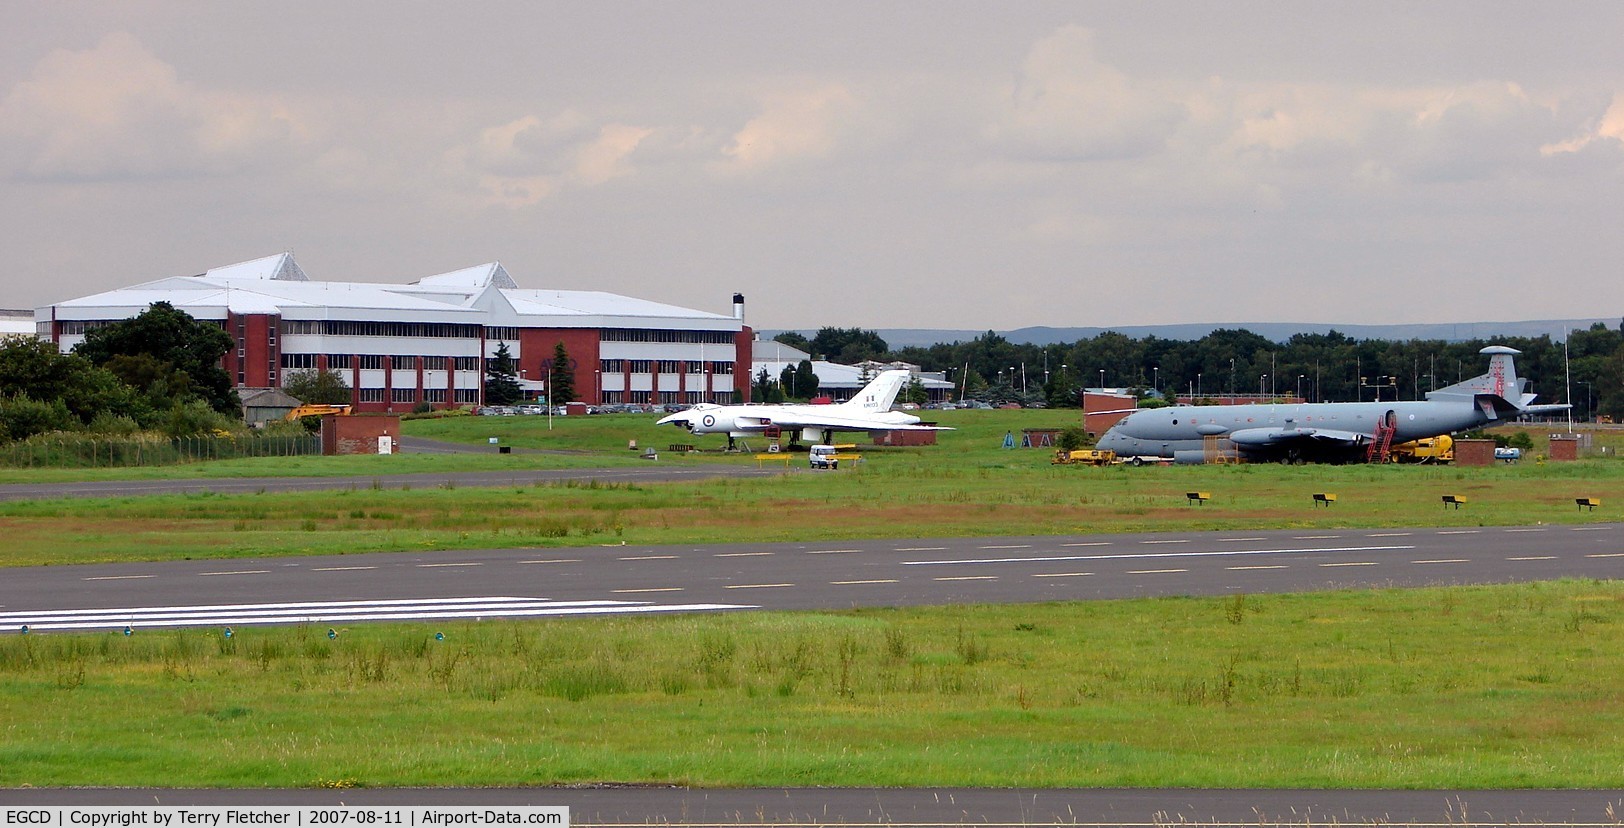 Woodford Aerodrome Airport, Stockport, England United Kingdom (EGCD) - Woodford Airfield , Manchester UK  ( former Bae146s and ATP production site)